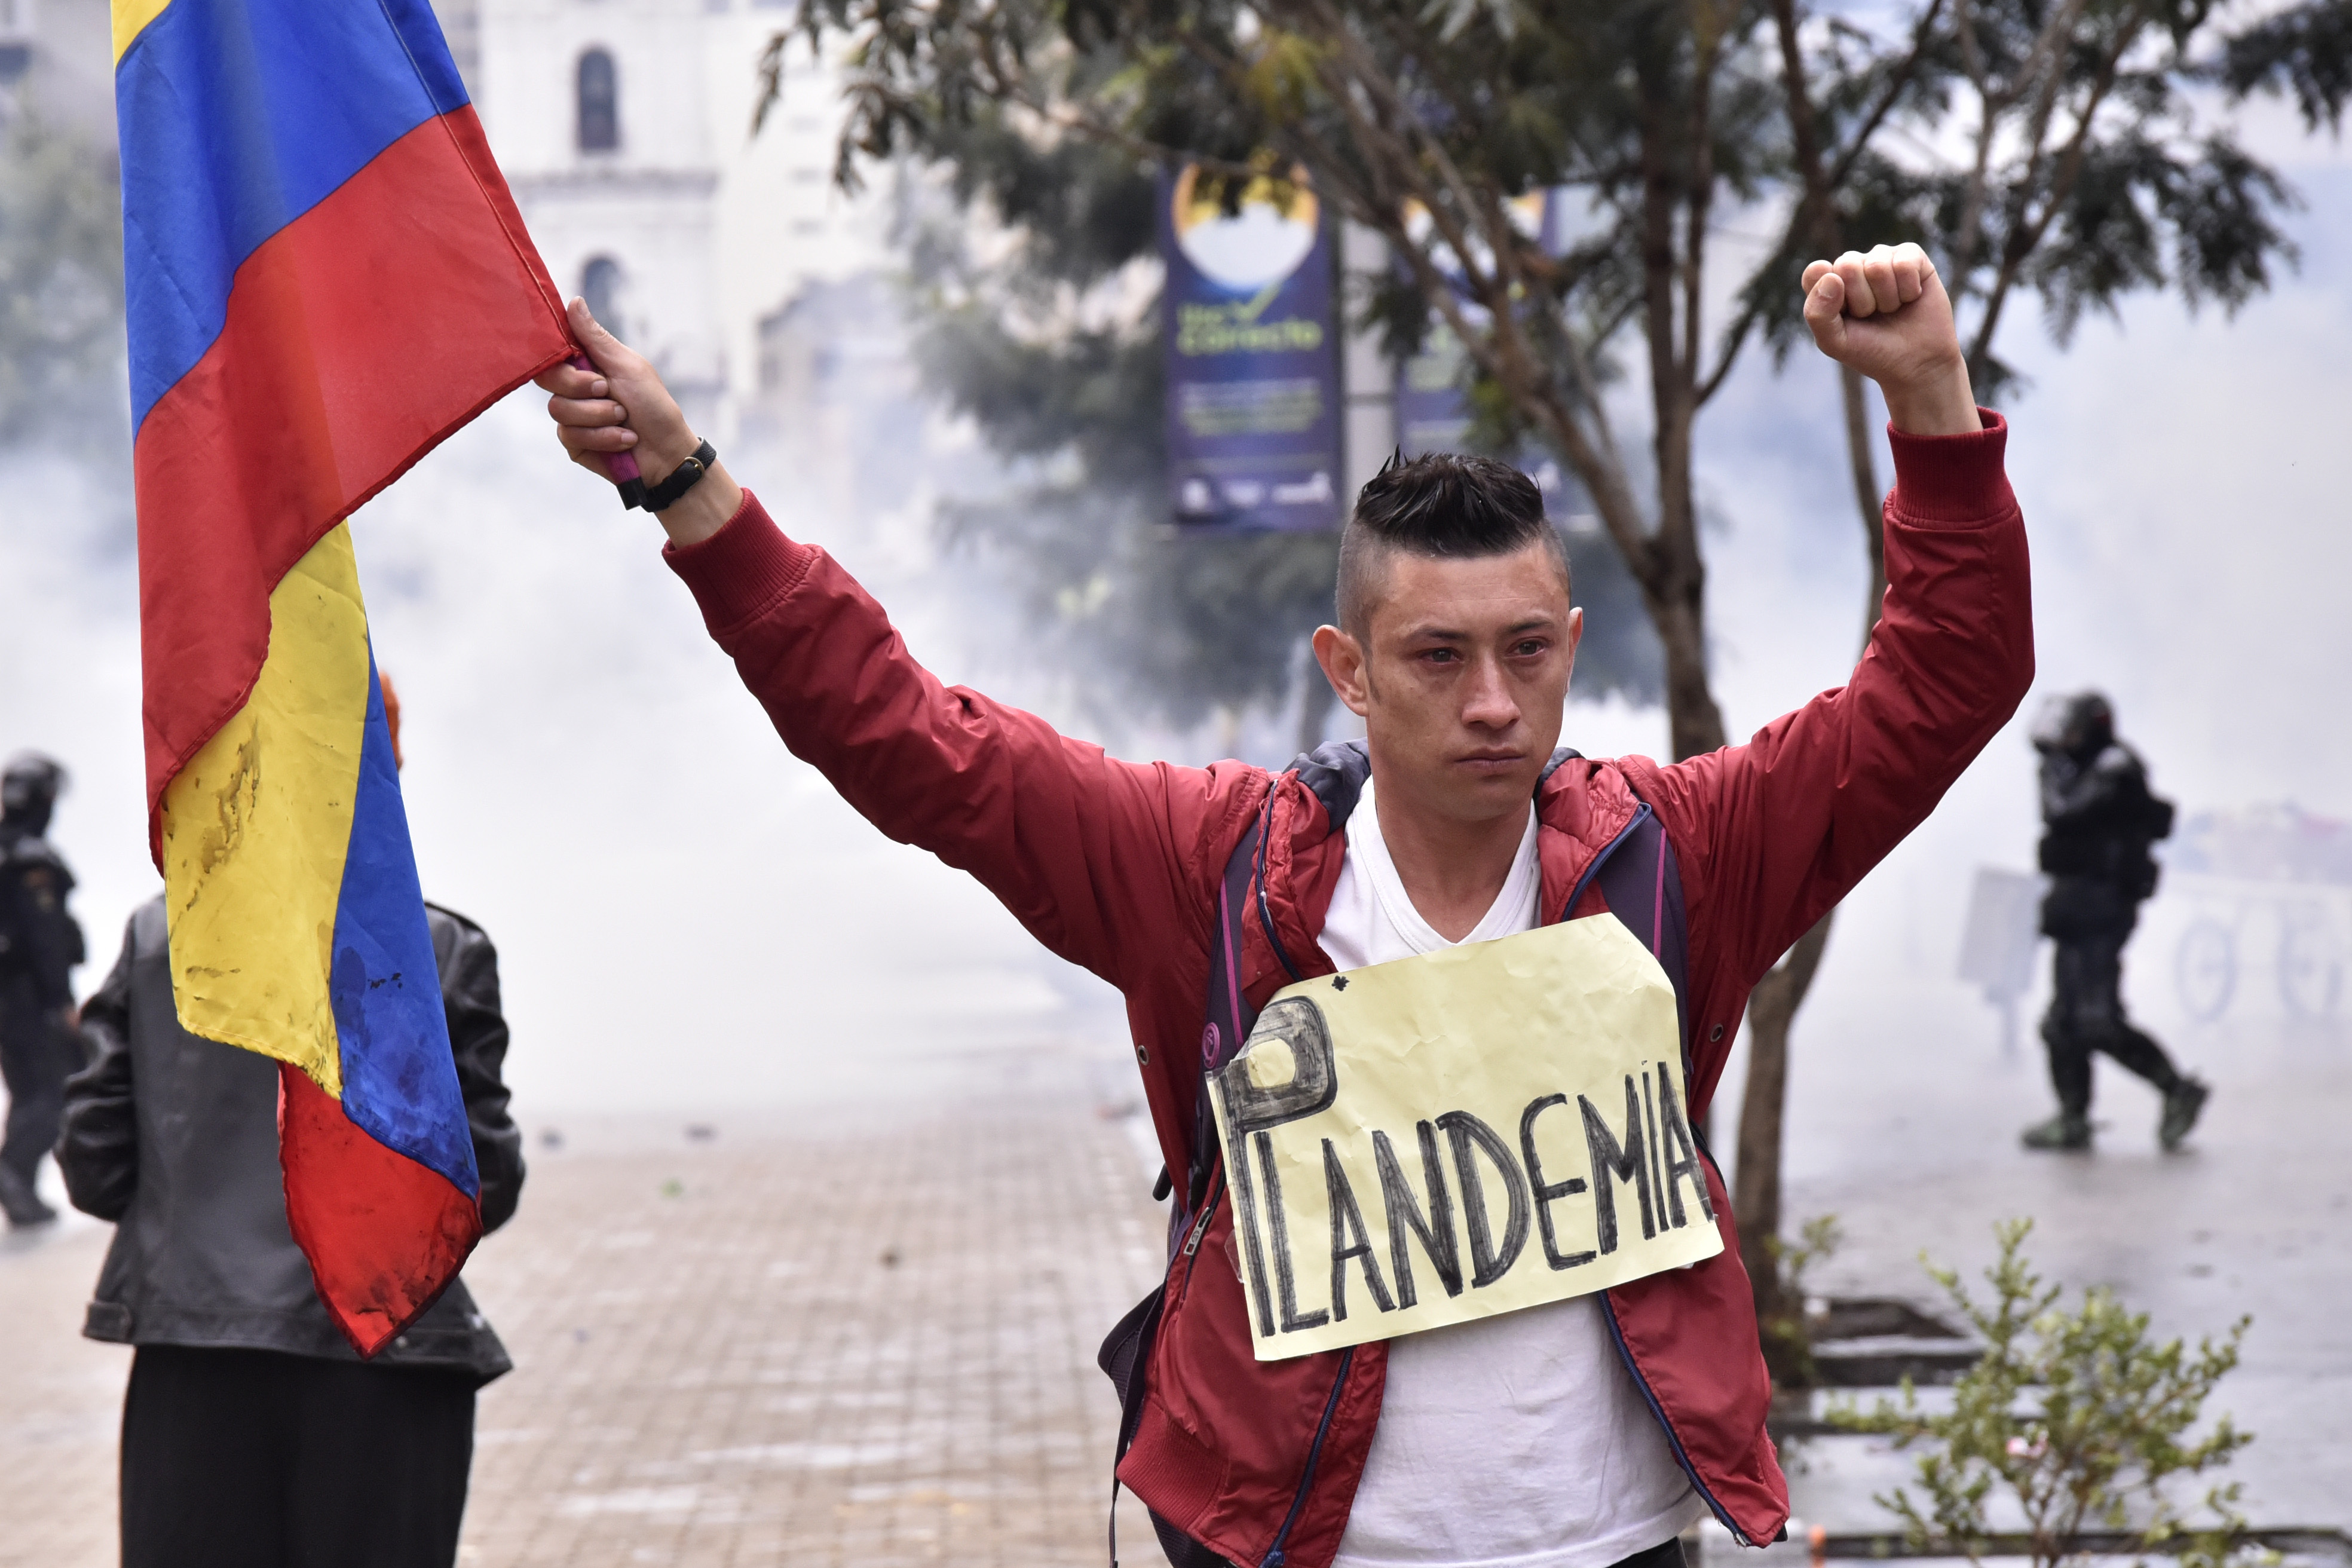 A protester holds a Colombian flag and a sign that reads "Plandemic" during the national strike against the tax reform proposed by Duque's administration in Bogota, Colombia. Unions joined to call to a national strike and demonstrations in major cities, urging participants to follow COVID-19 protocols. They seek to sink a tax reform which proposes elimination of VAT free goods.